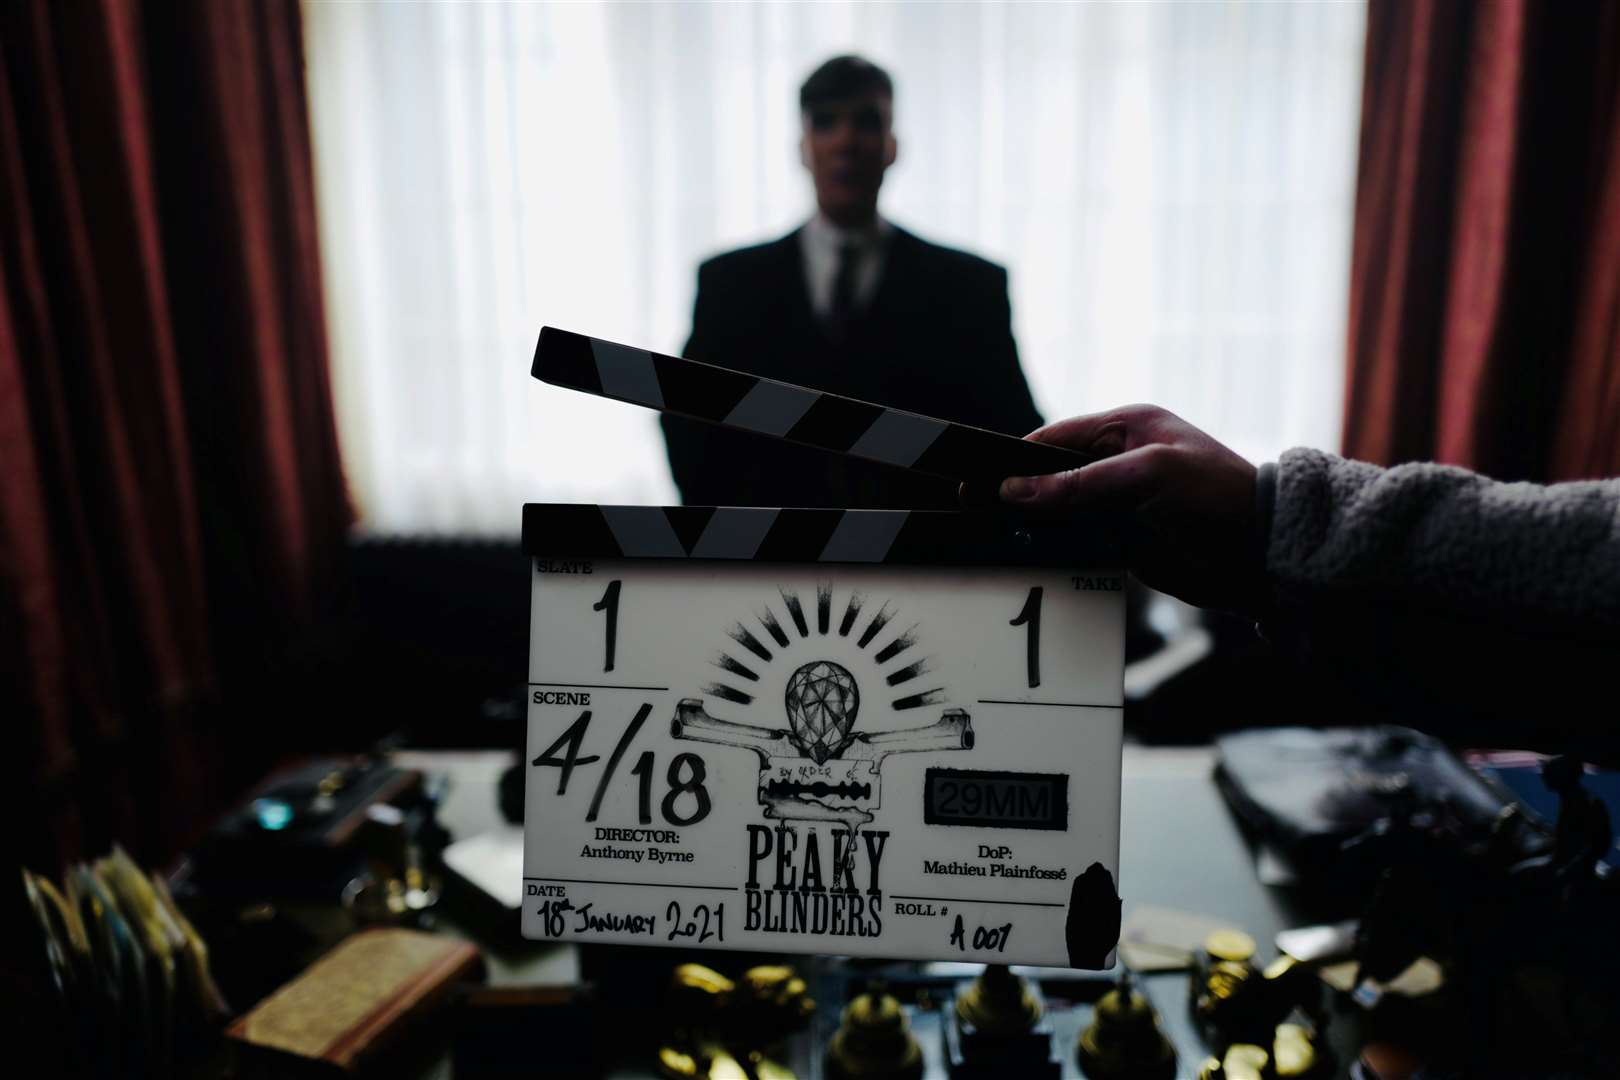 Filming begins on the new series of the BBC's Peaky Blinders.